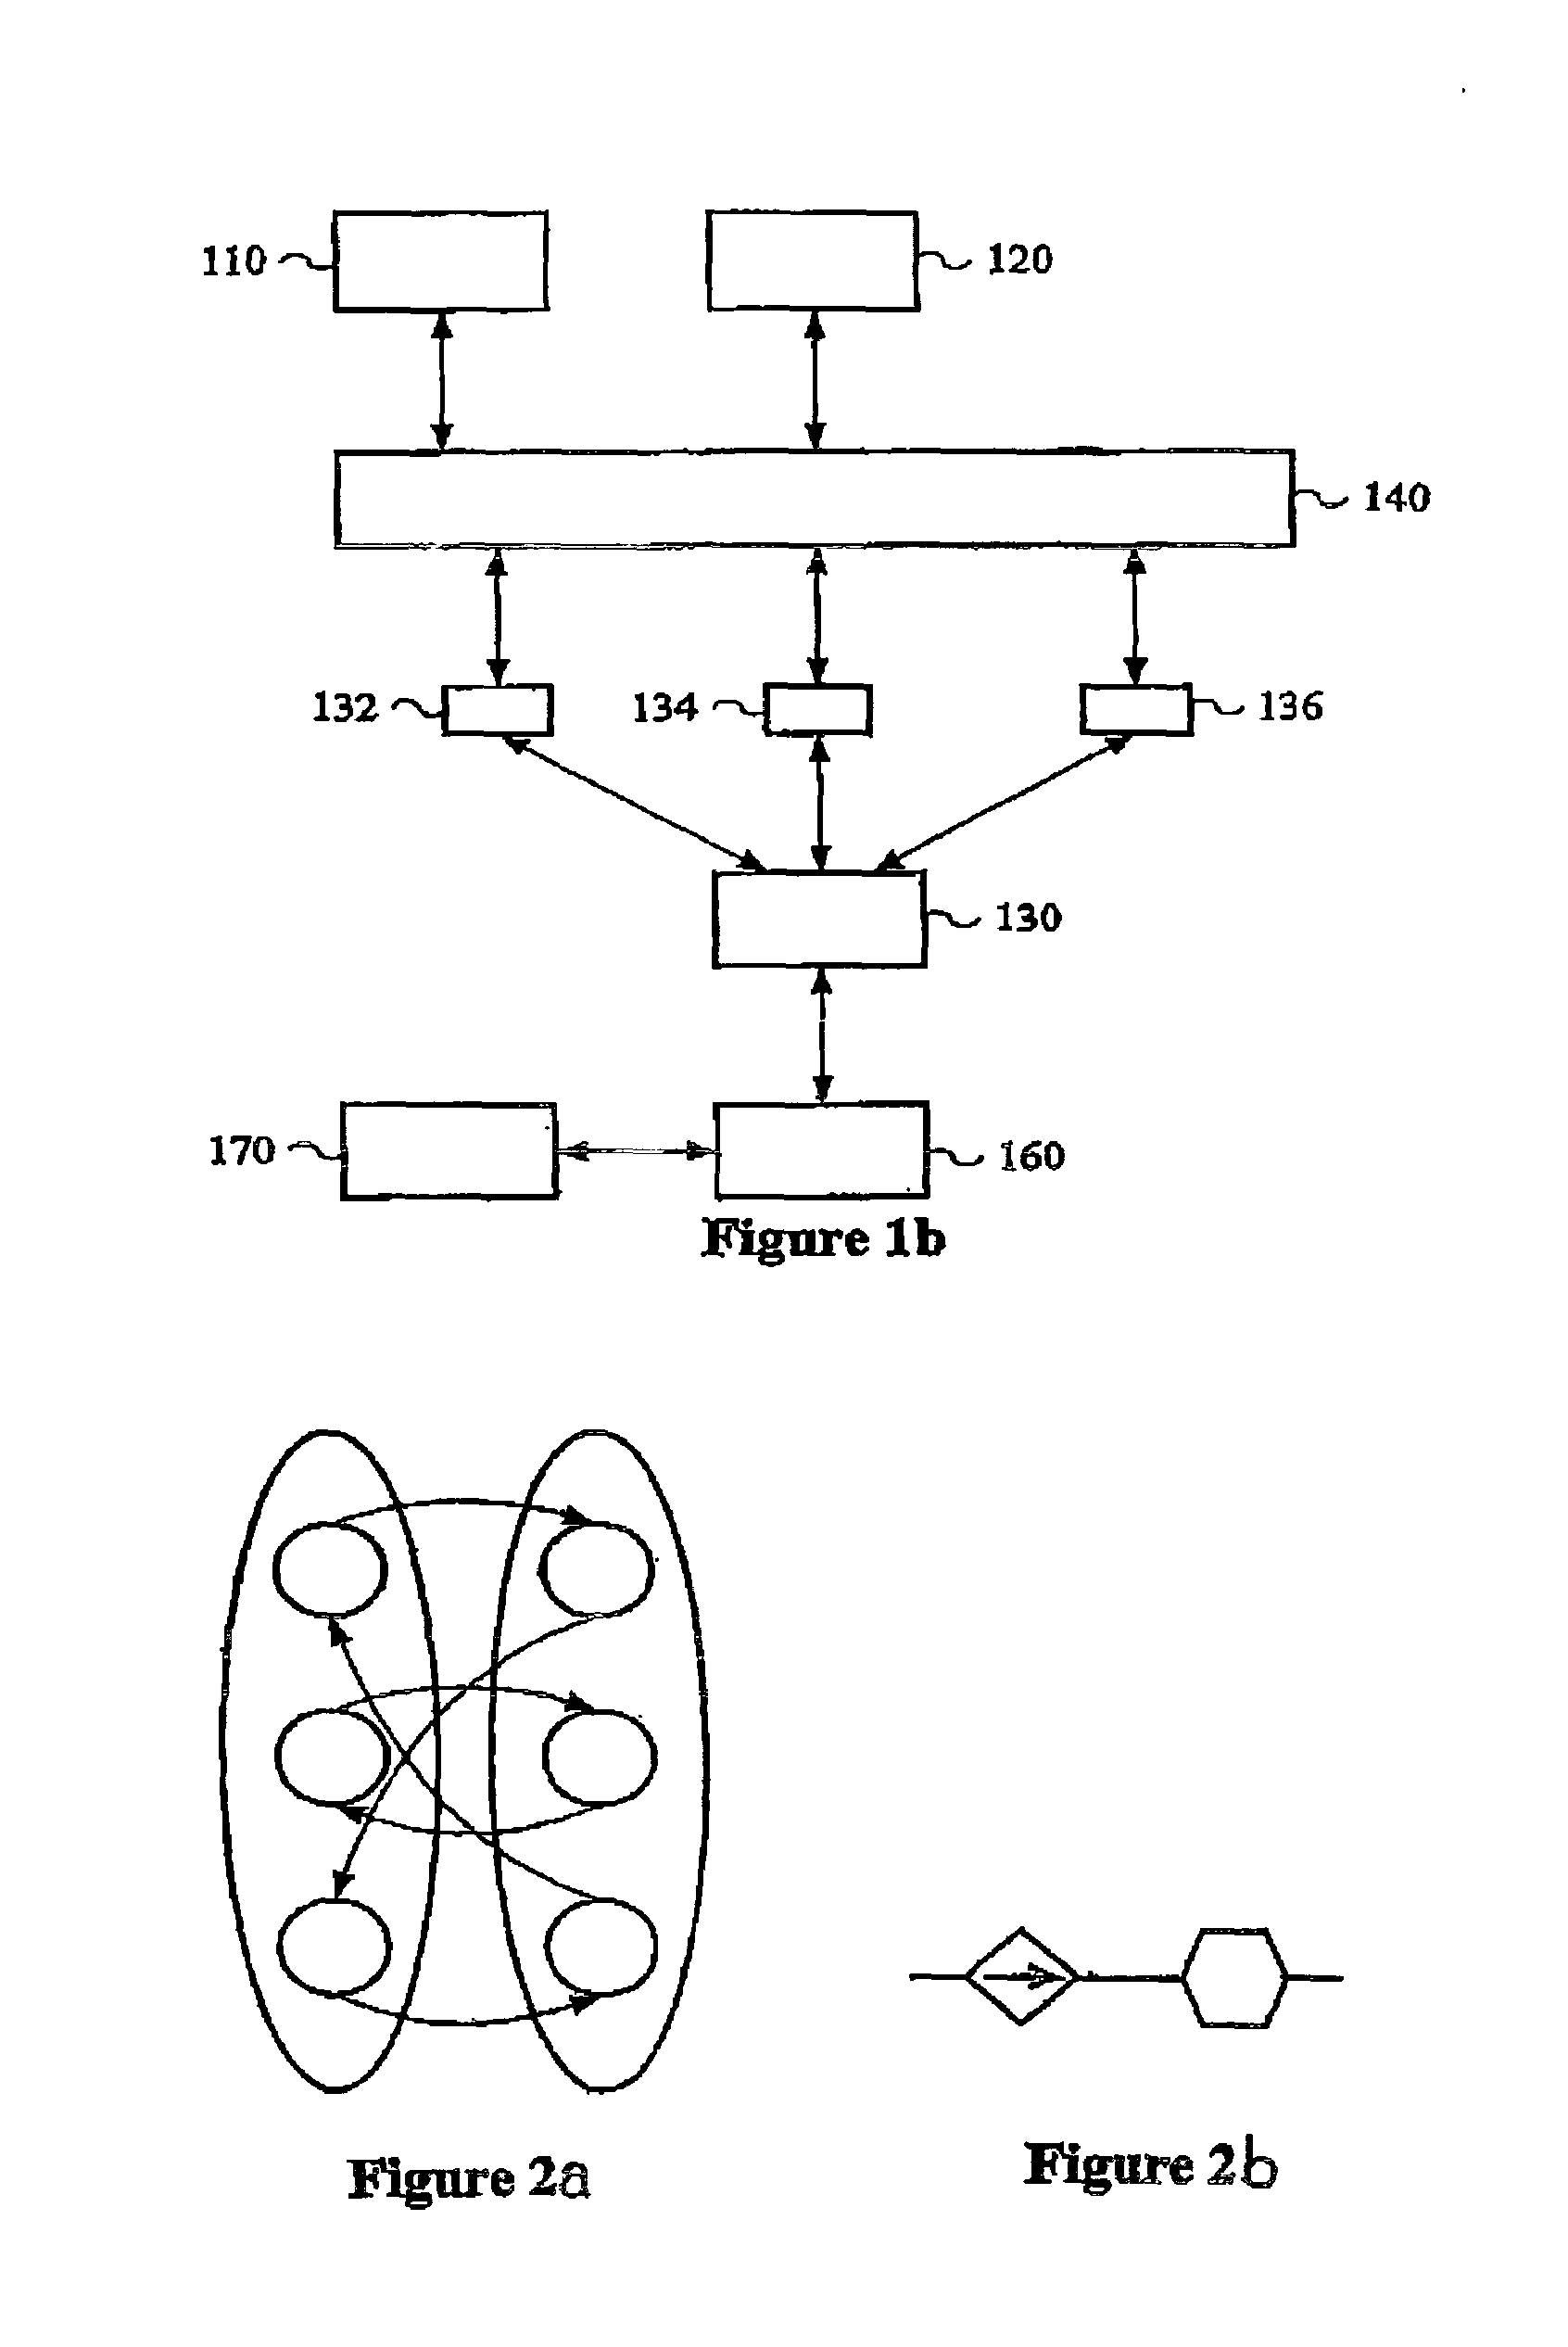 Apparatus, method and computer program product for modelling causality in a flow system